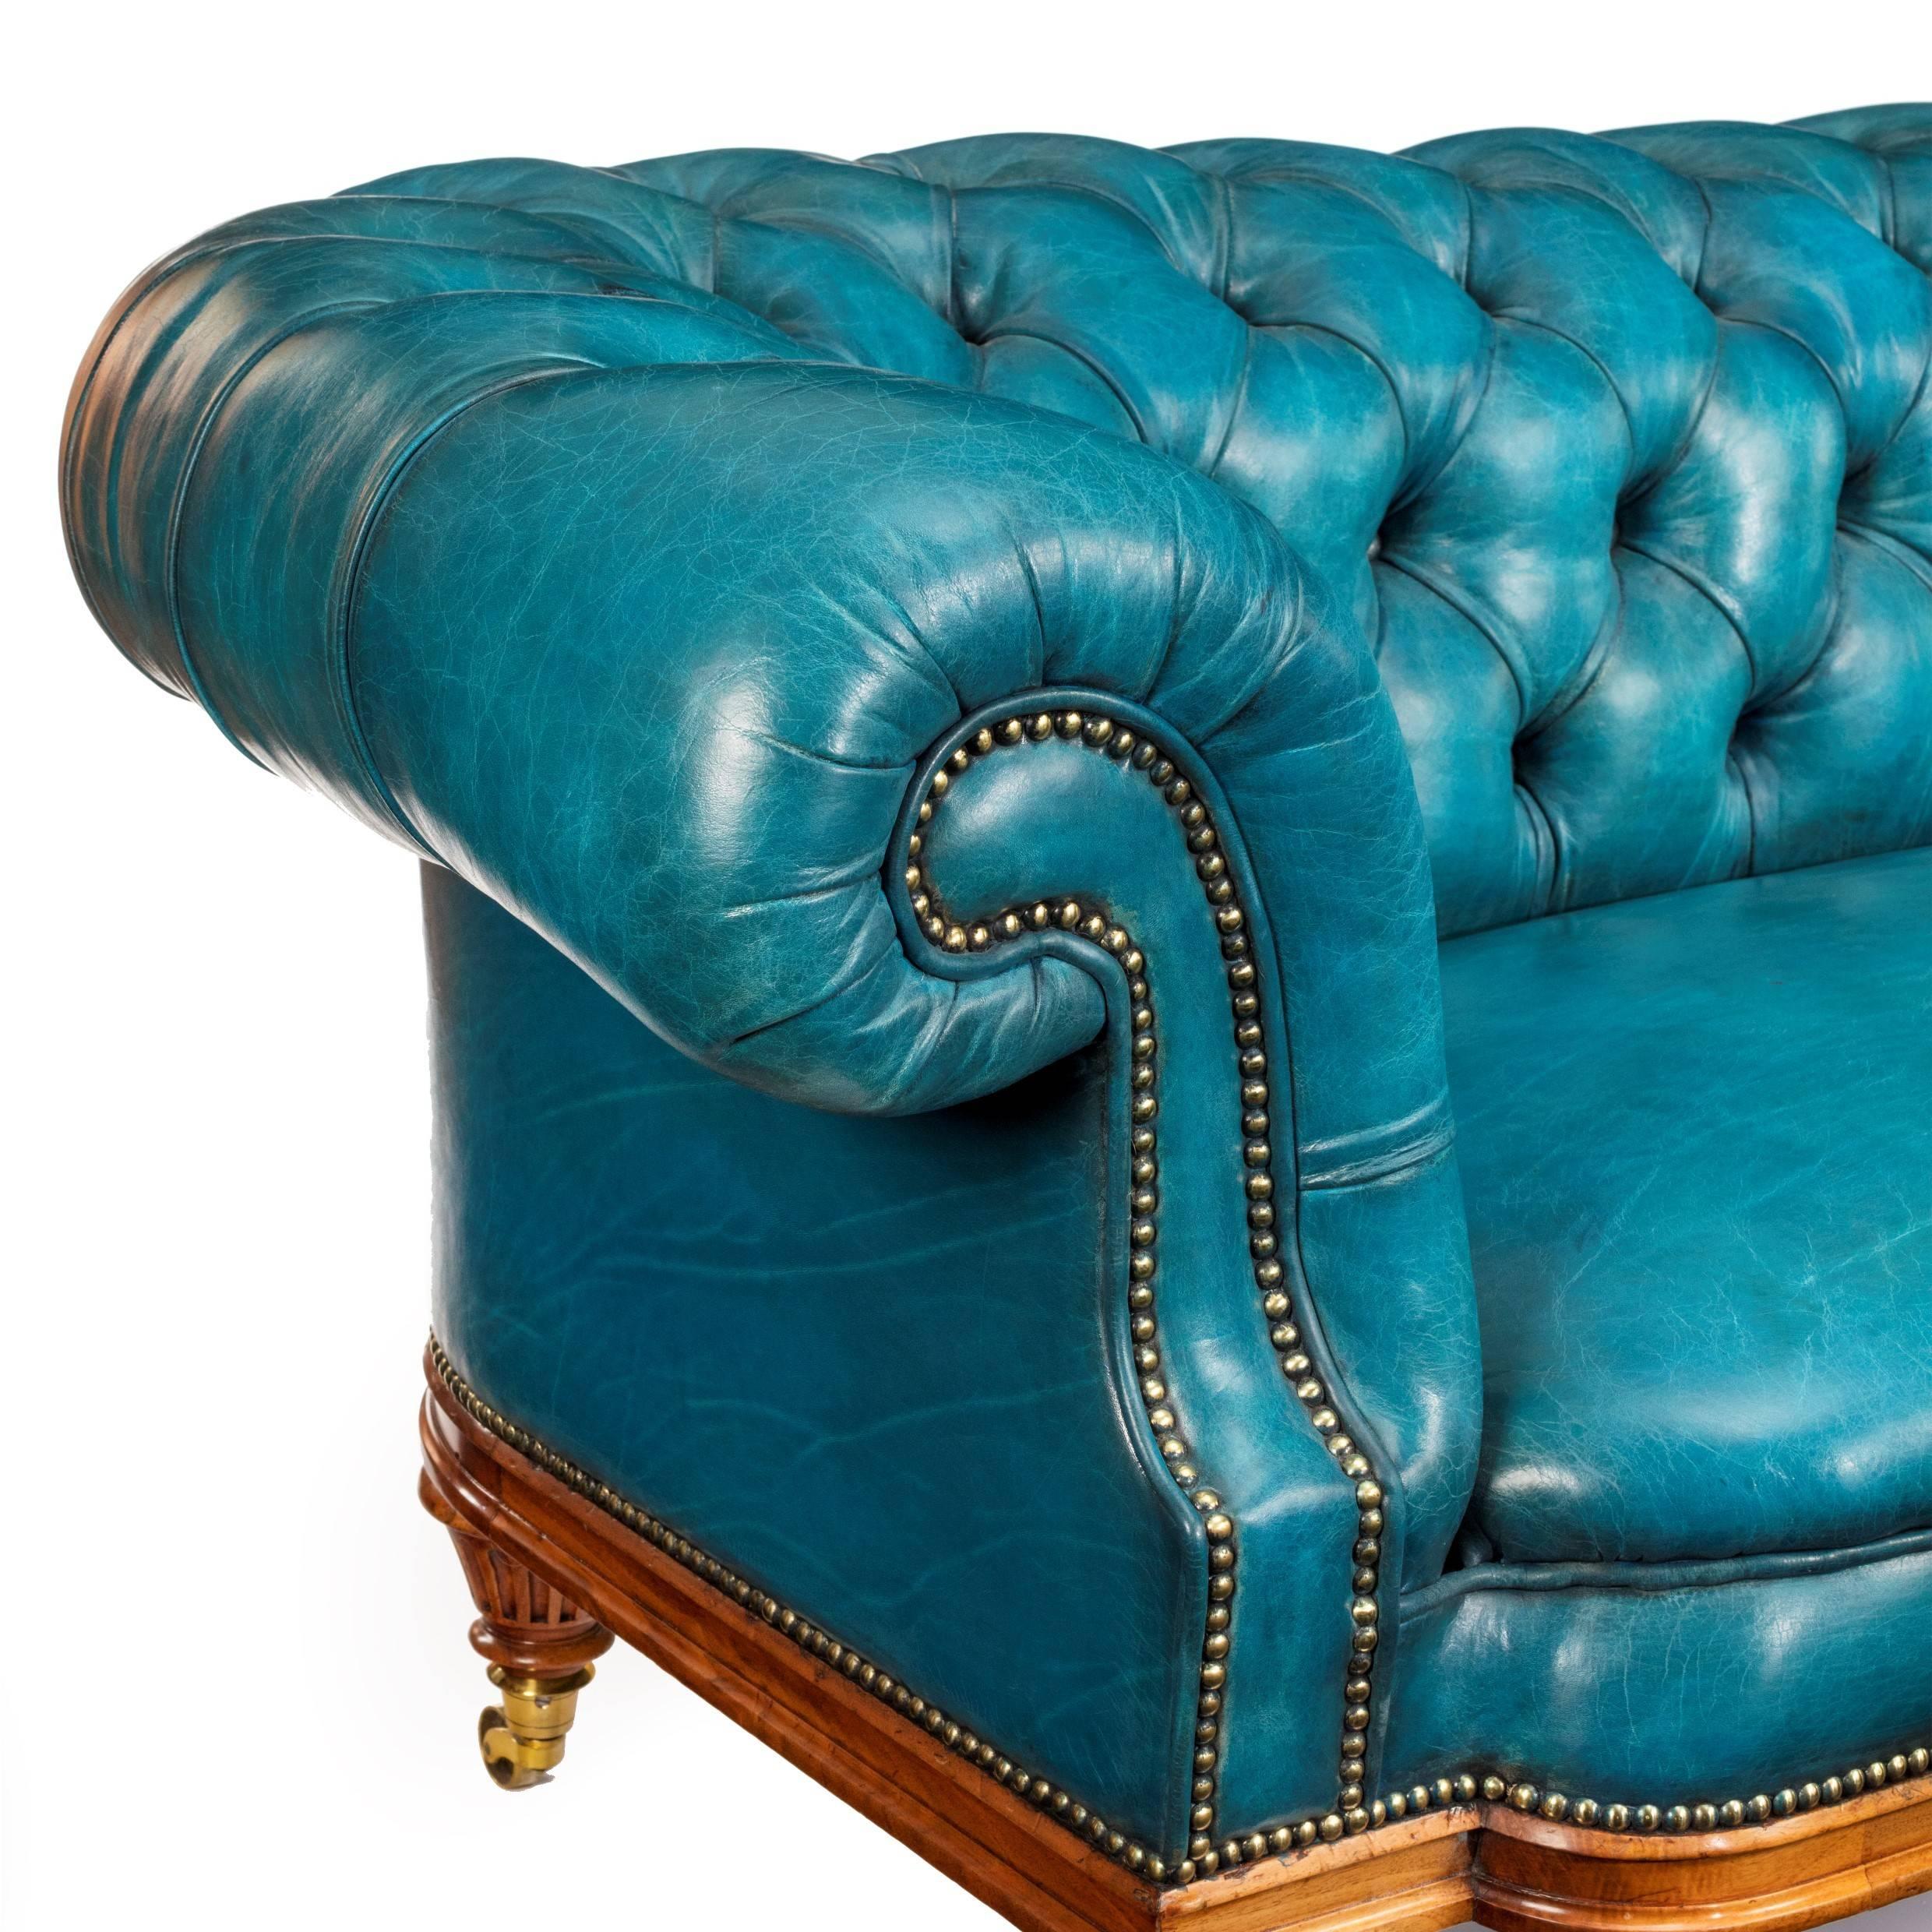 Unusual Victorian Chesterfield sofa on a walnut show wood frame, of typical form with deep seats and rolled arms and back, re-upholstered in deep buttoned turquoise leather.